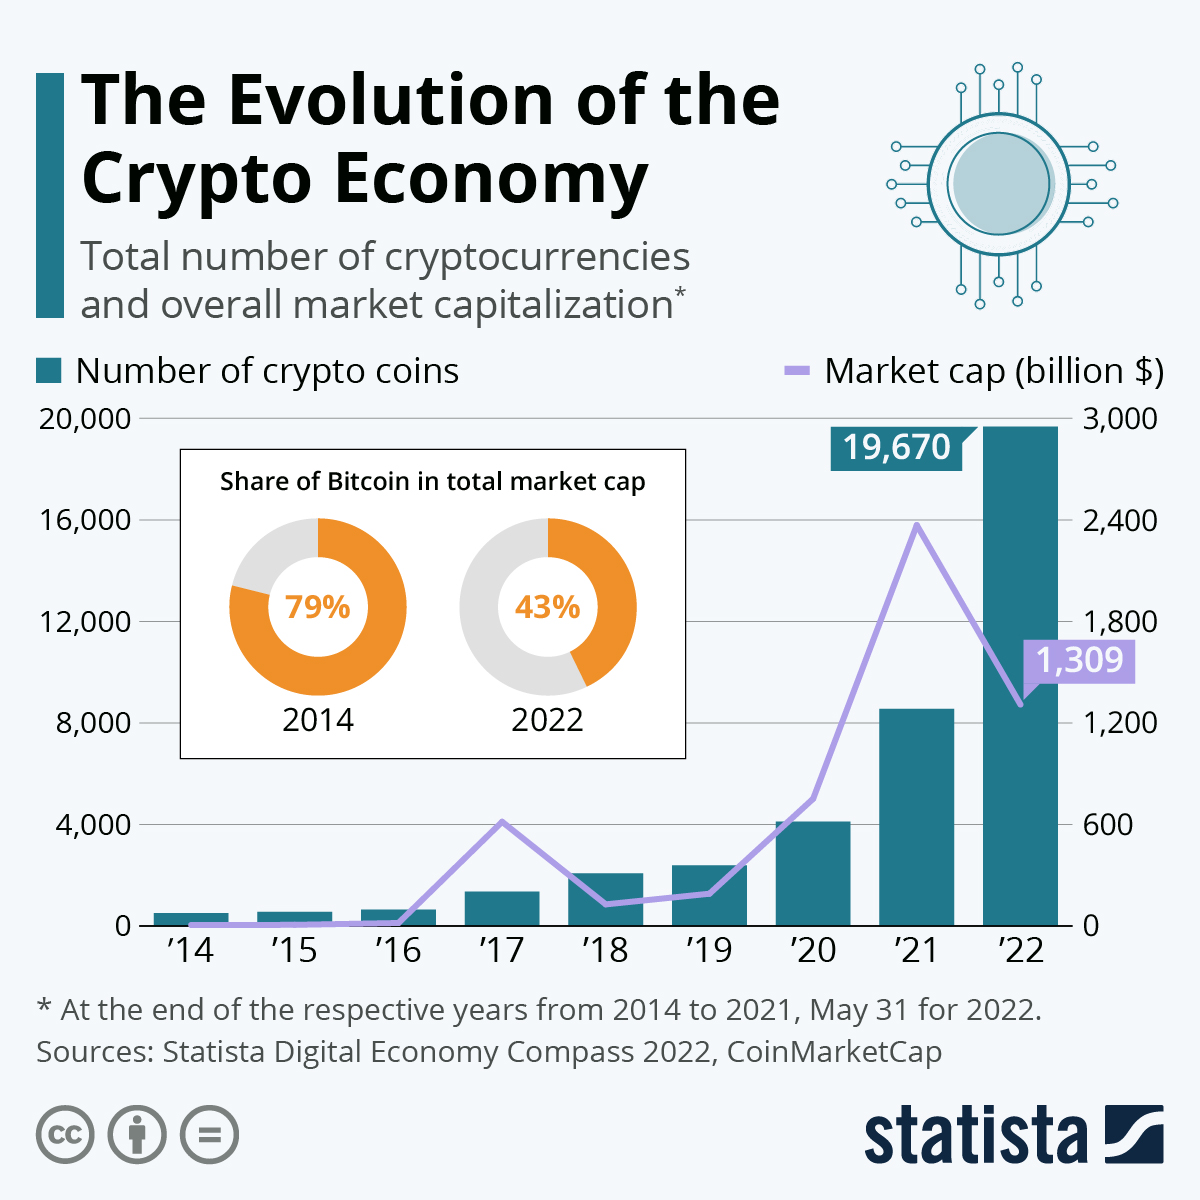 largest cryptocurrency by market capitalization